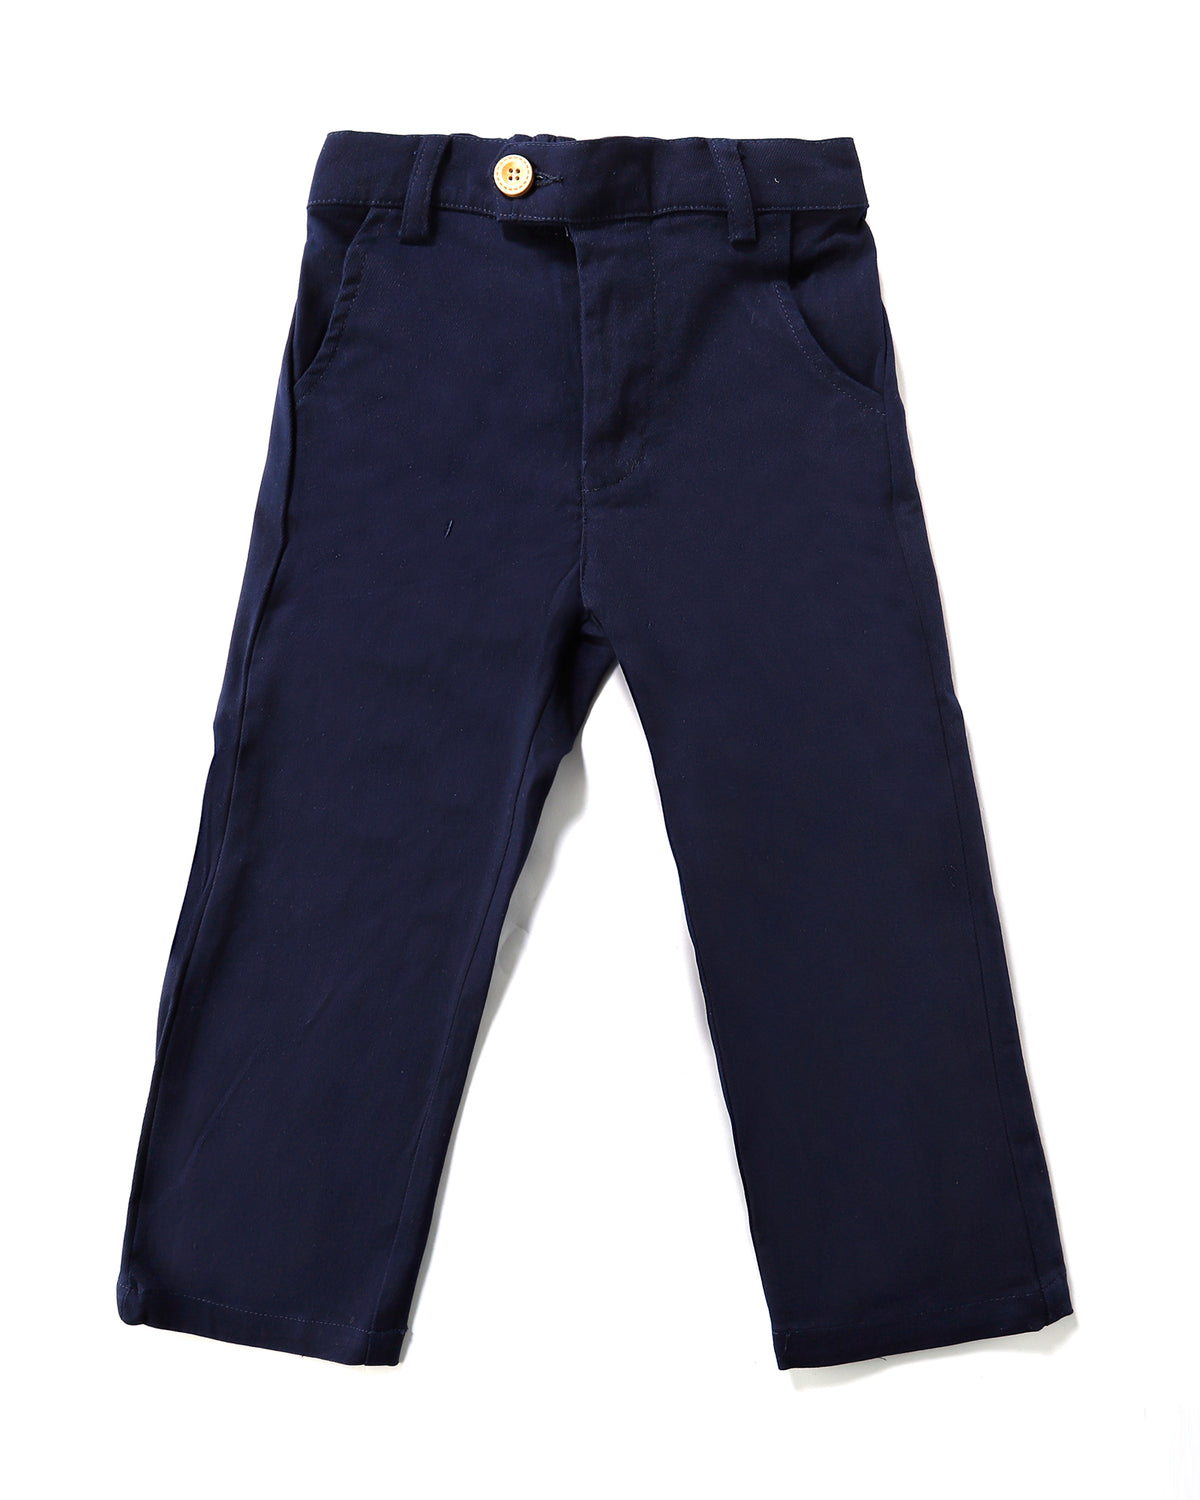 Signature Chino in Navy Front